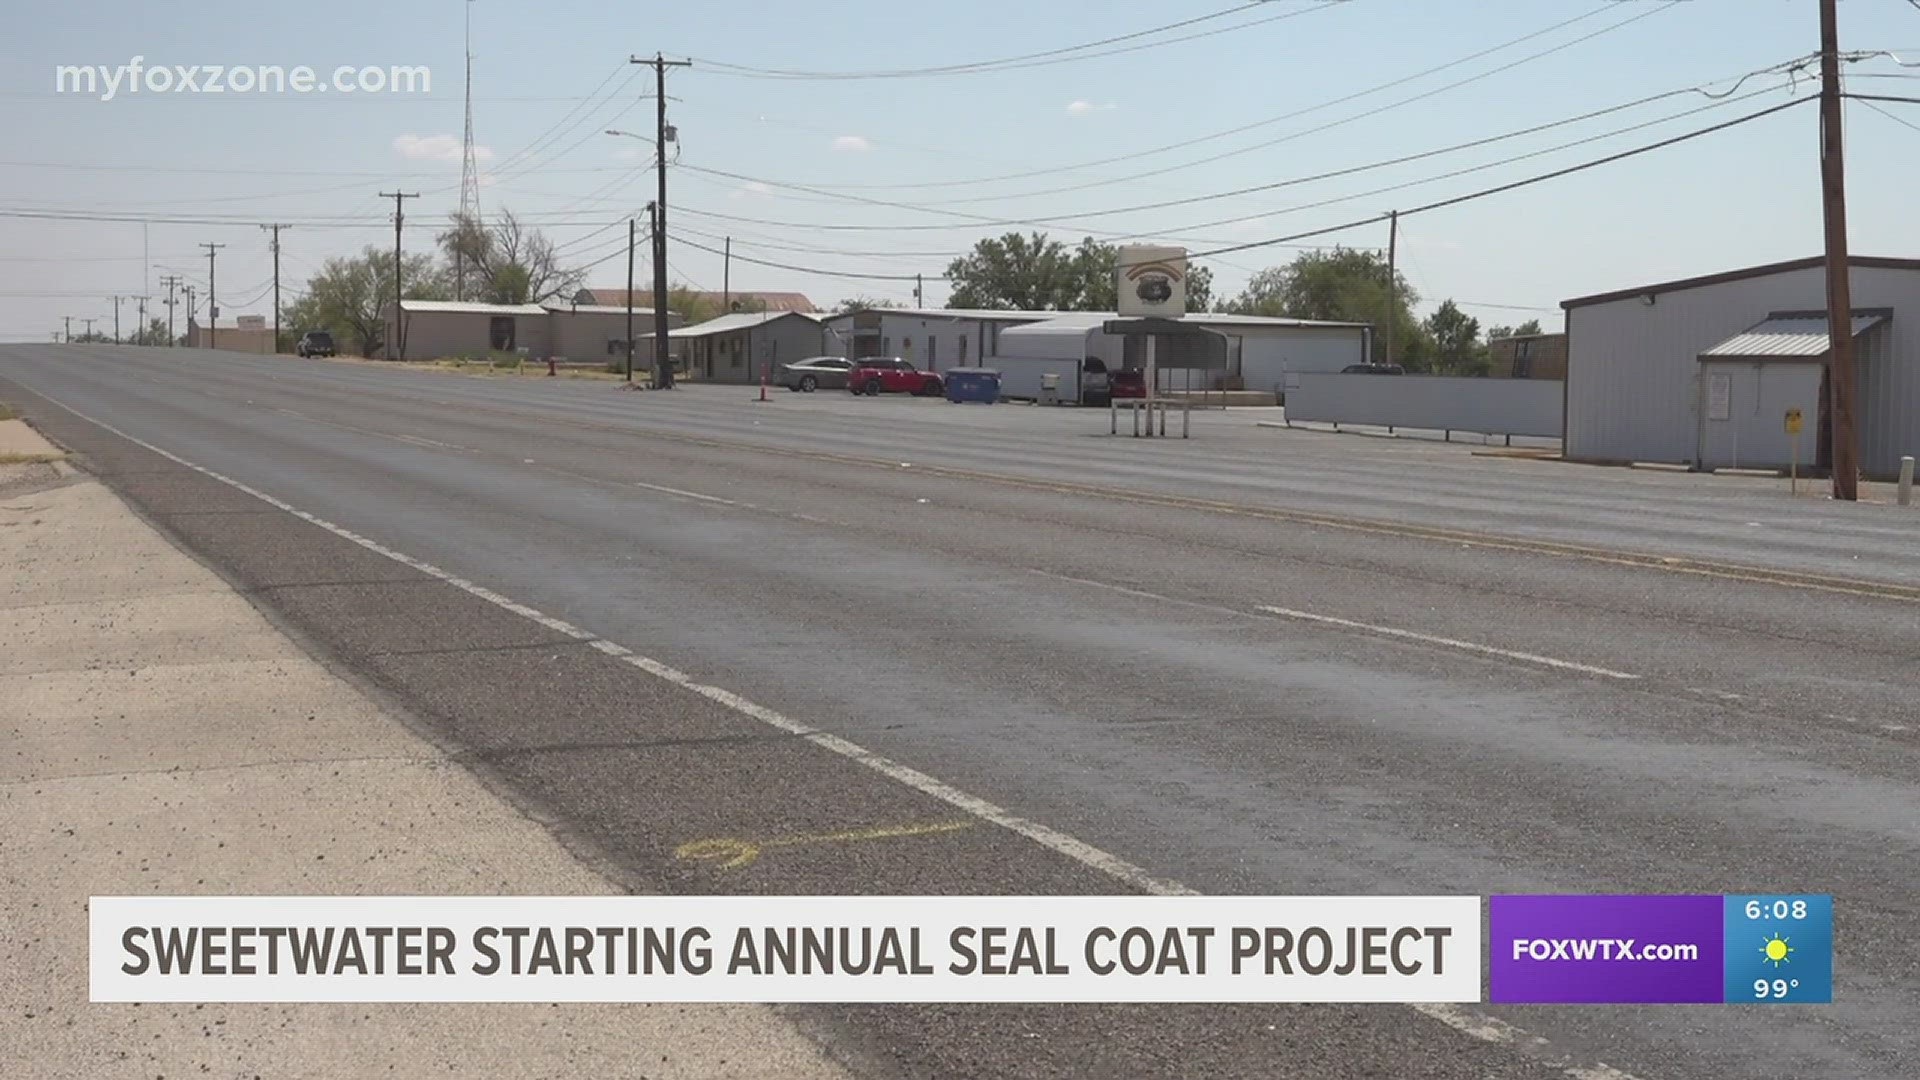 Starting Tuesday, September 5th, Sweetwater will begin its annual seal coat project. Drivers are asked to watch for street crews in certain areas of town.